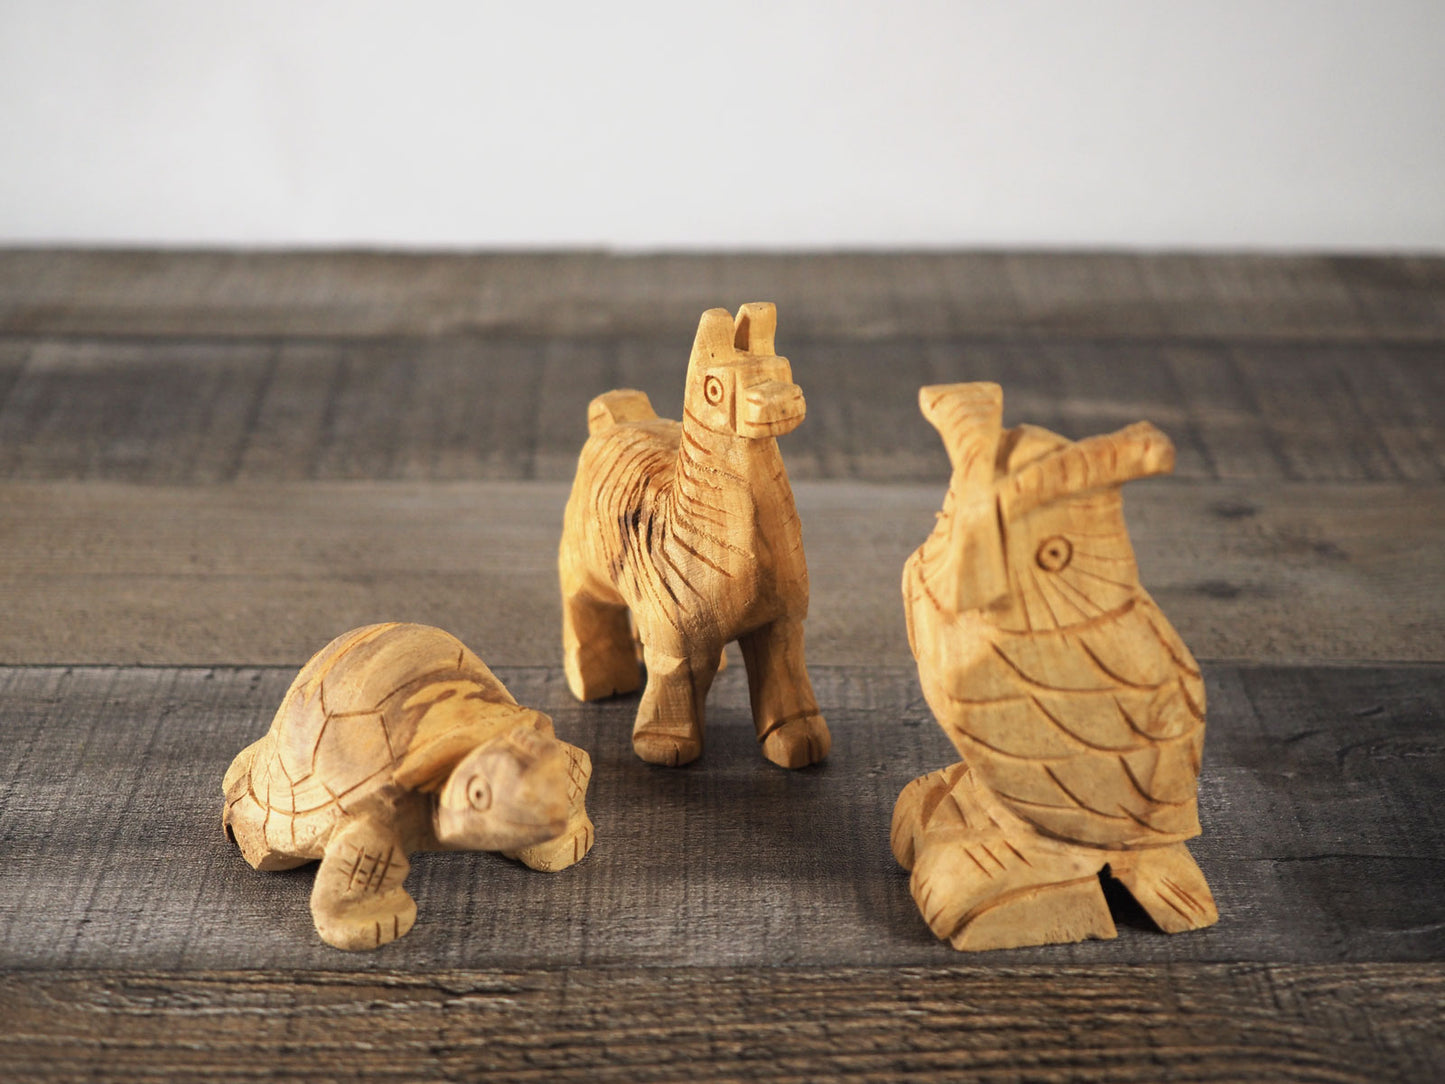 Wood carvings made from Palo Santo - a turtle, an alpaca, and an owl